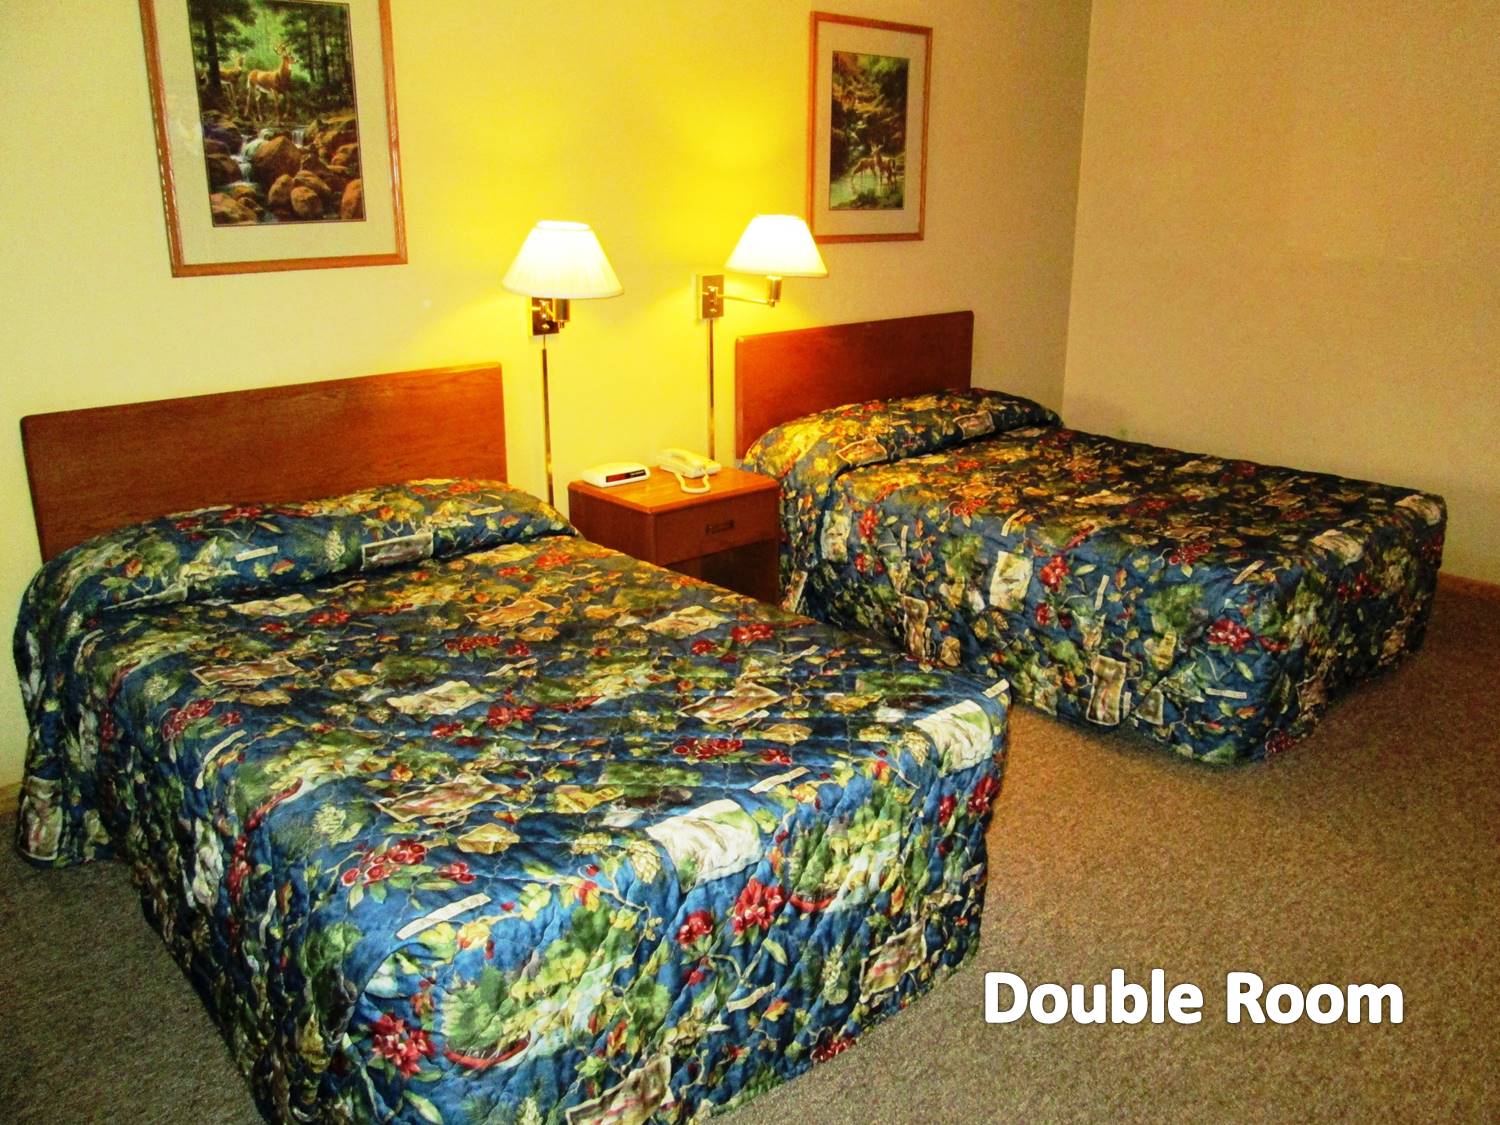 Room with two full-size beds and appropriate furnishings.